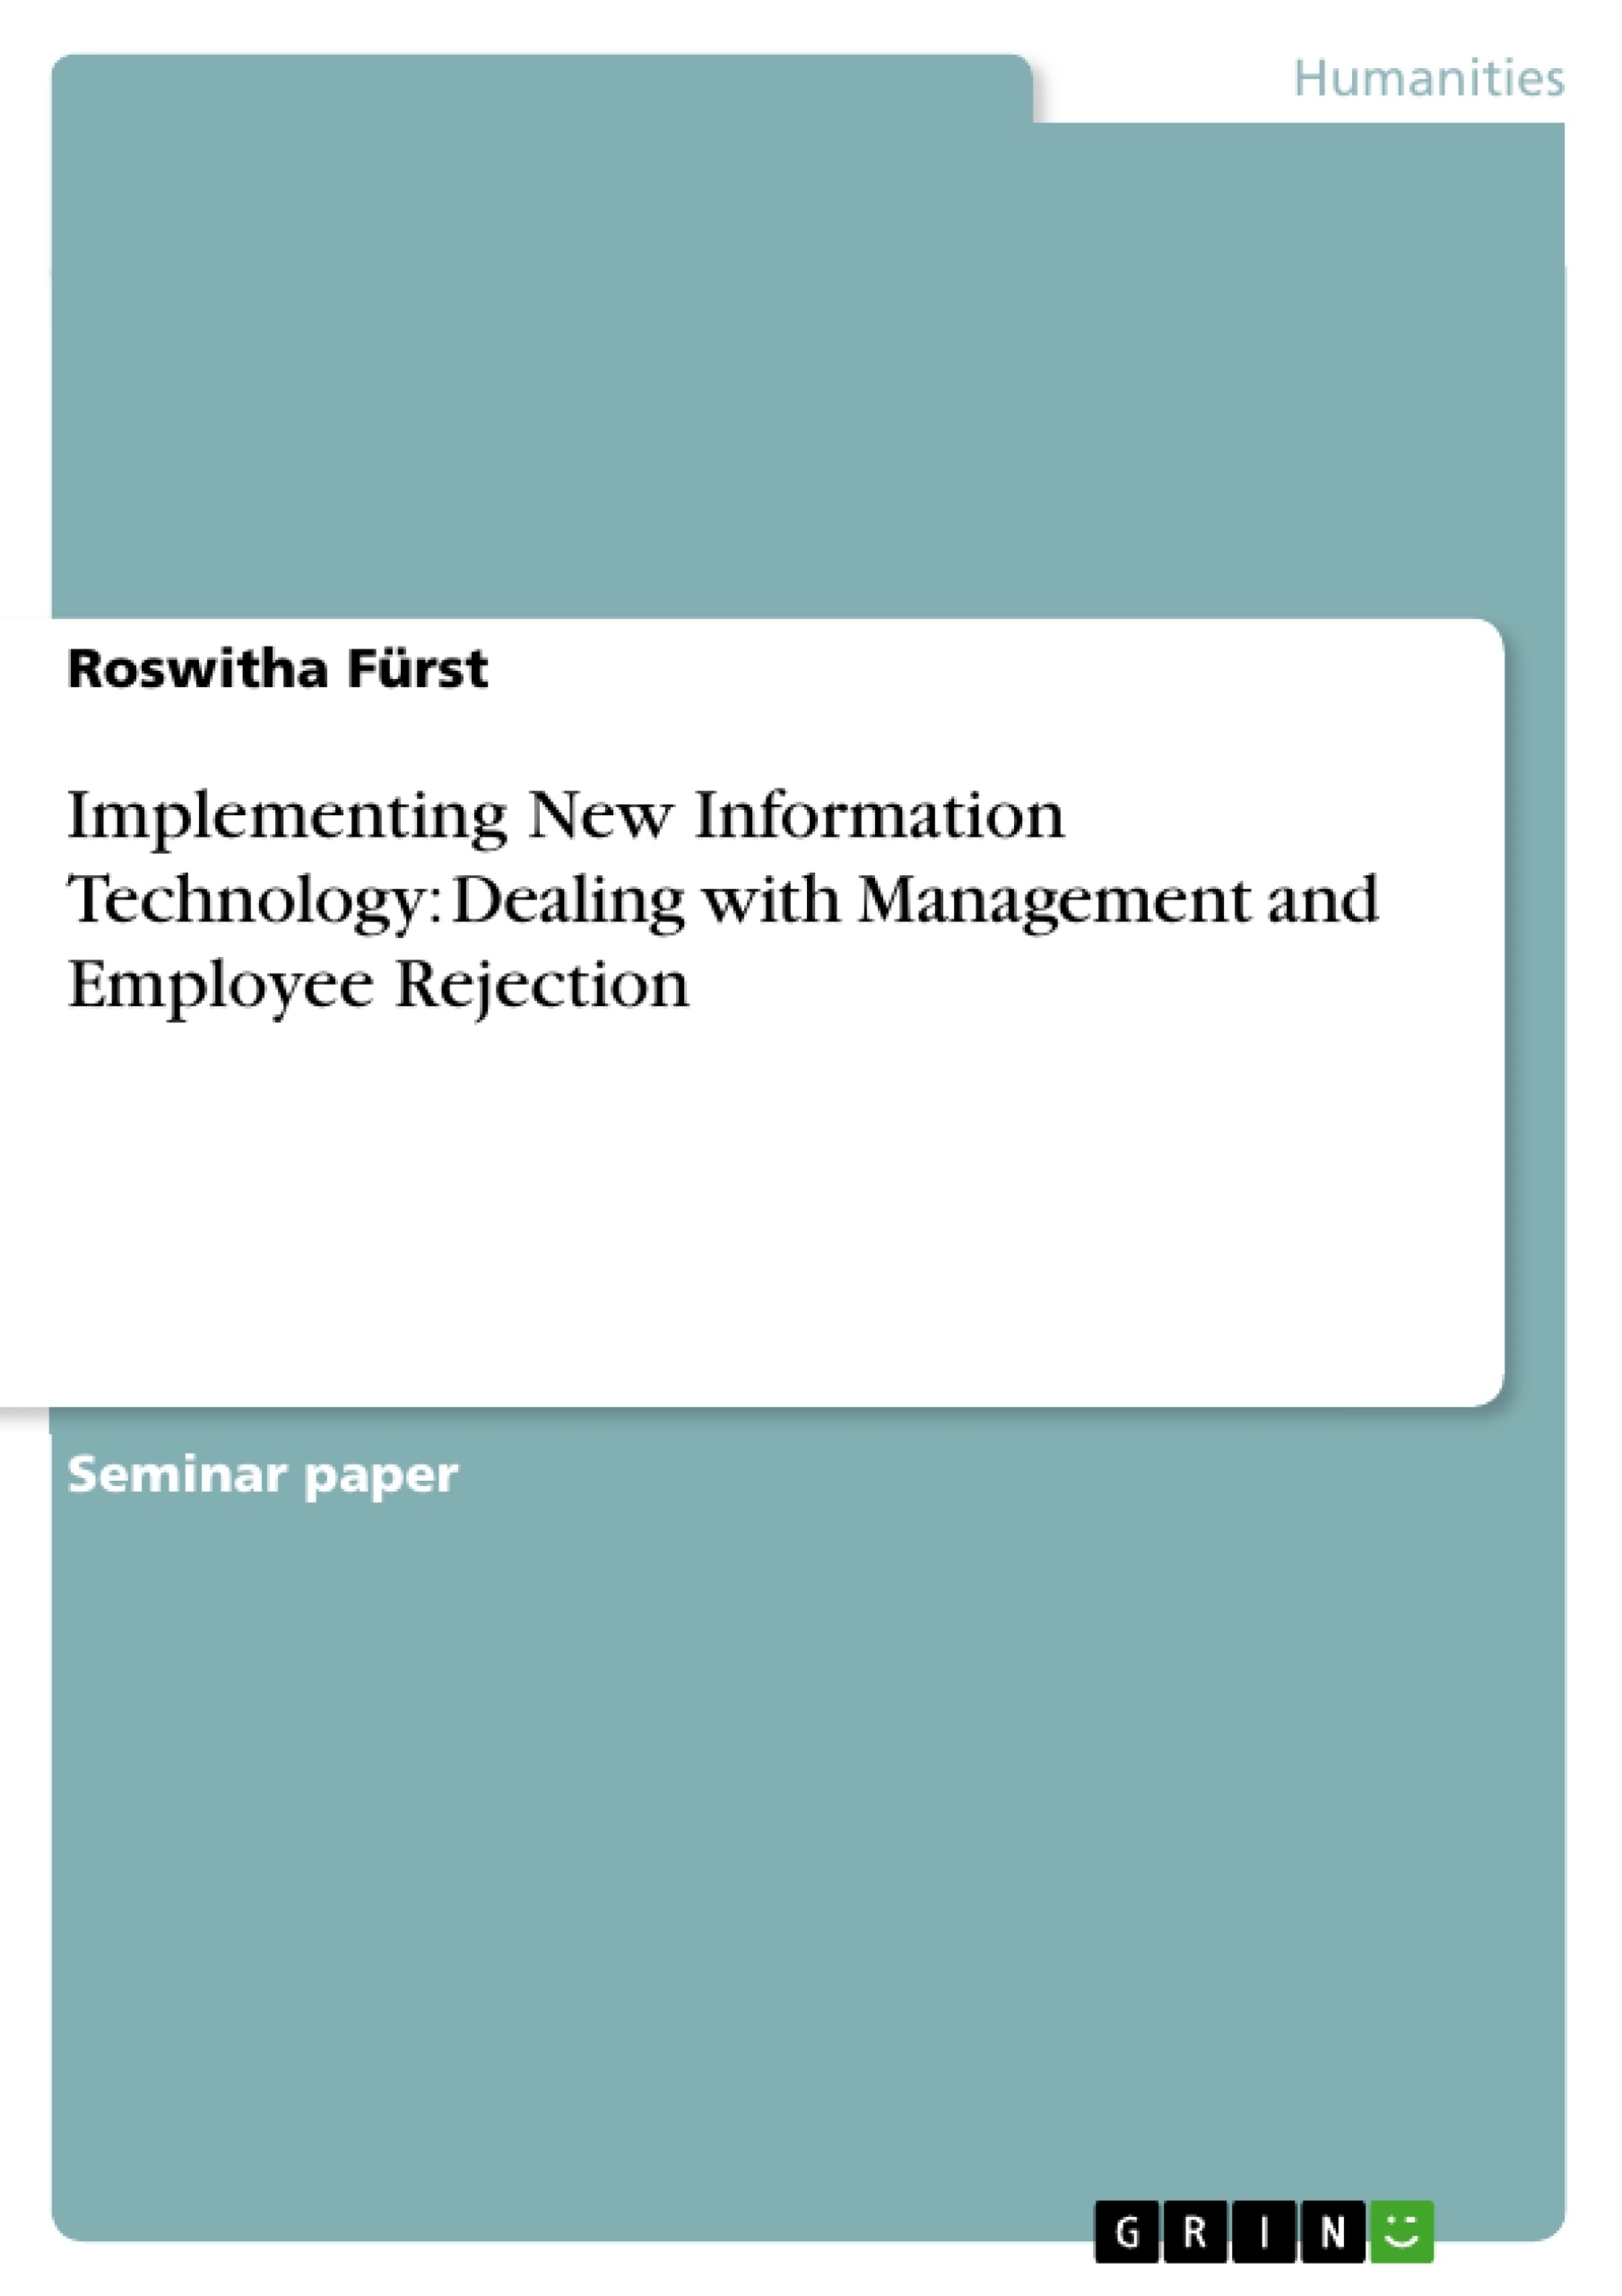 Title: Implementing New Information Technology: Dealing with Management and Employee Rejection